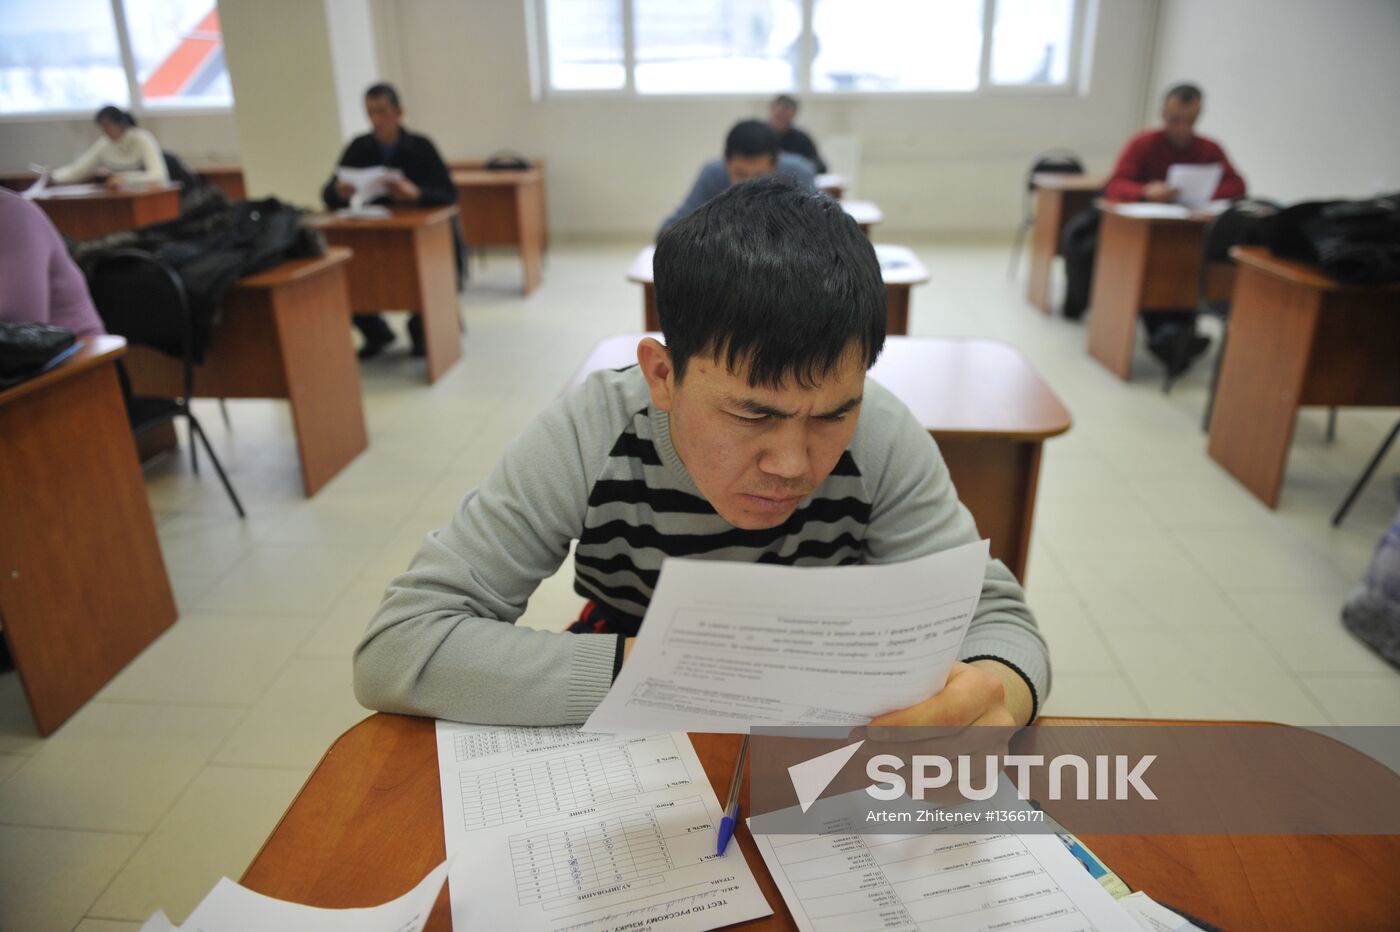 Russian language test for migrant workers